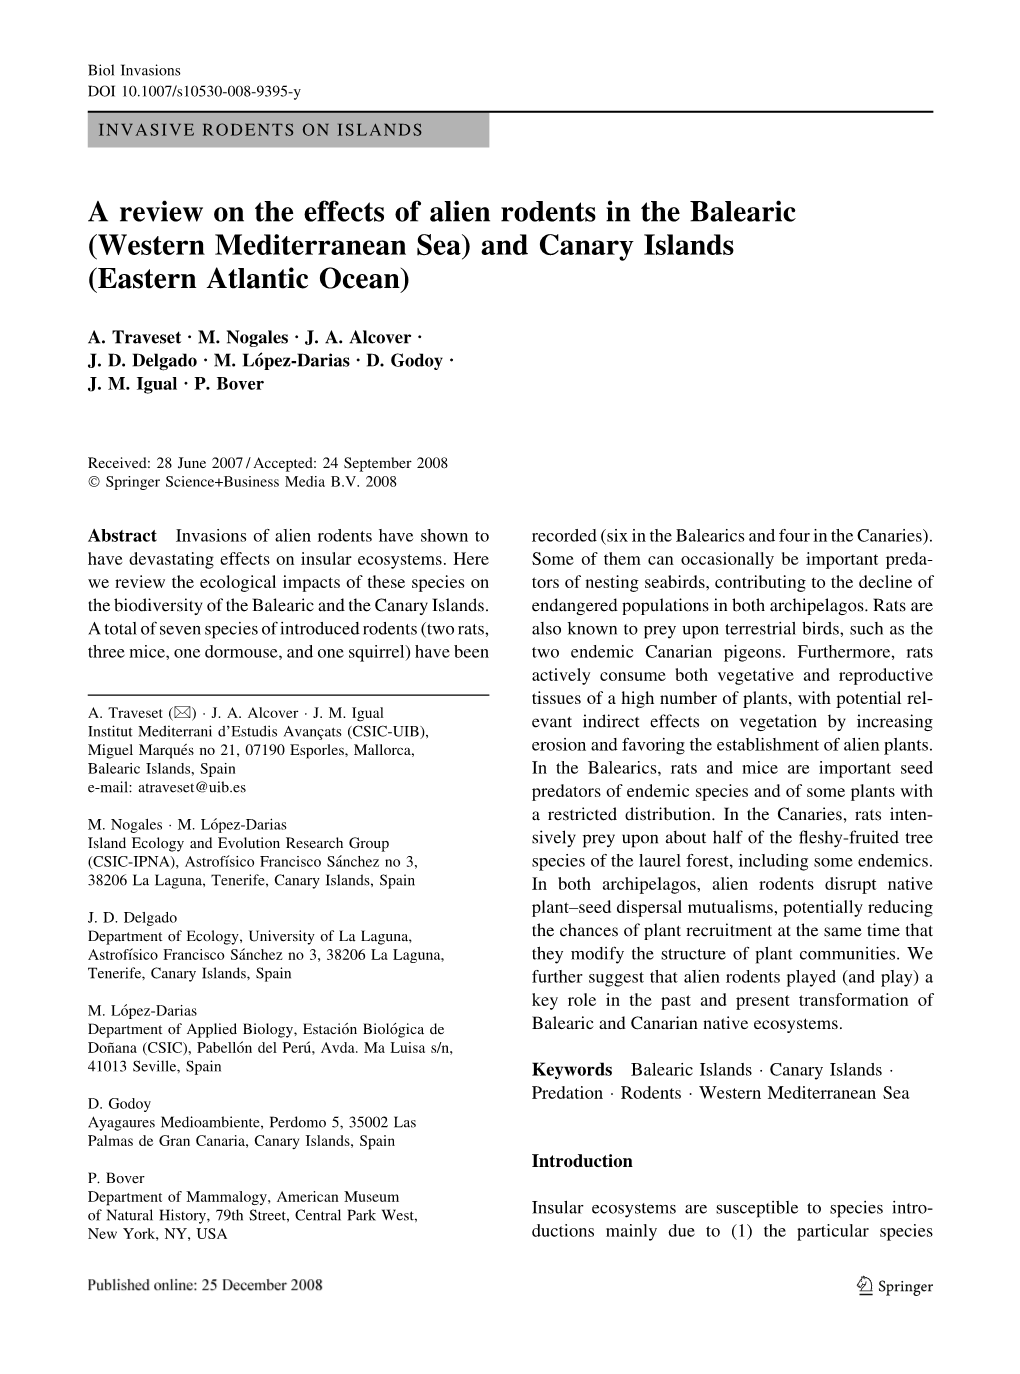 A Review on the Effects of Alien Rodents in the Balearic (Western Mediterranean Sea) and Canary Islands (Eastern Atlantic Ocean)